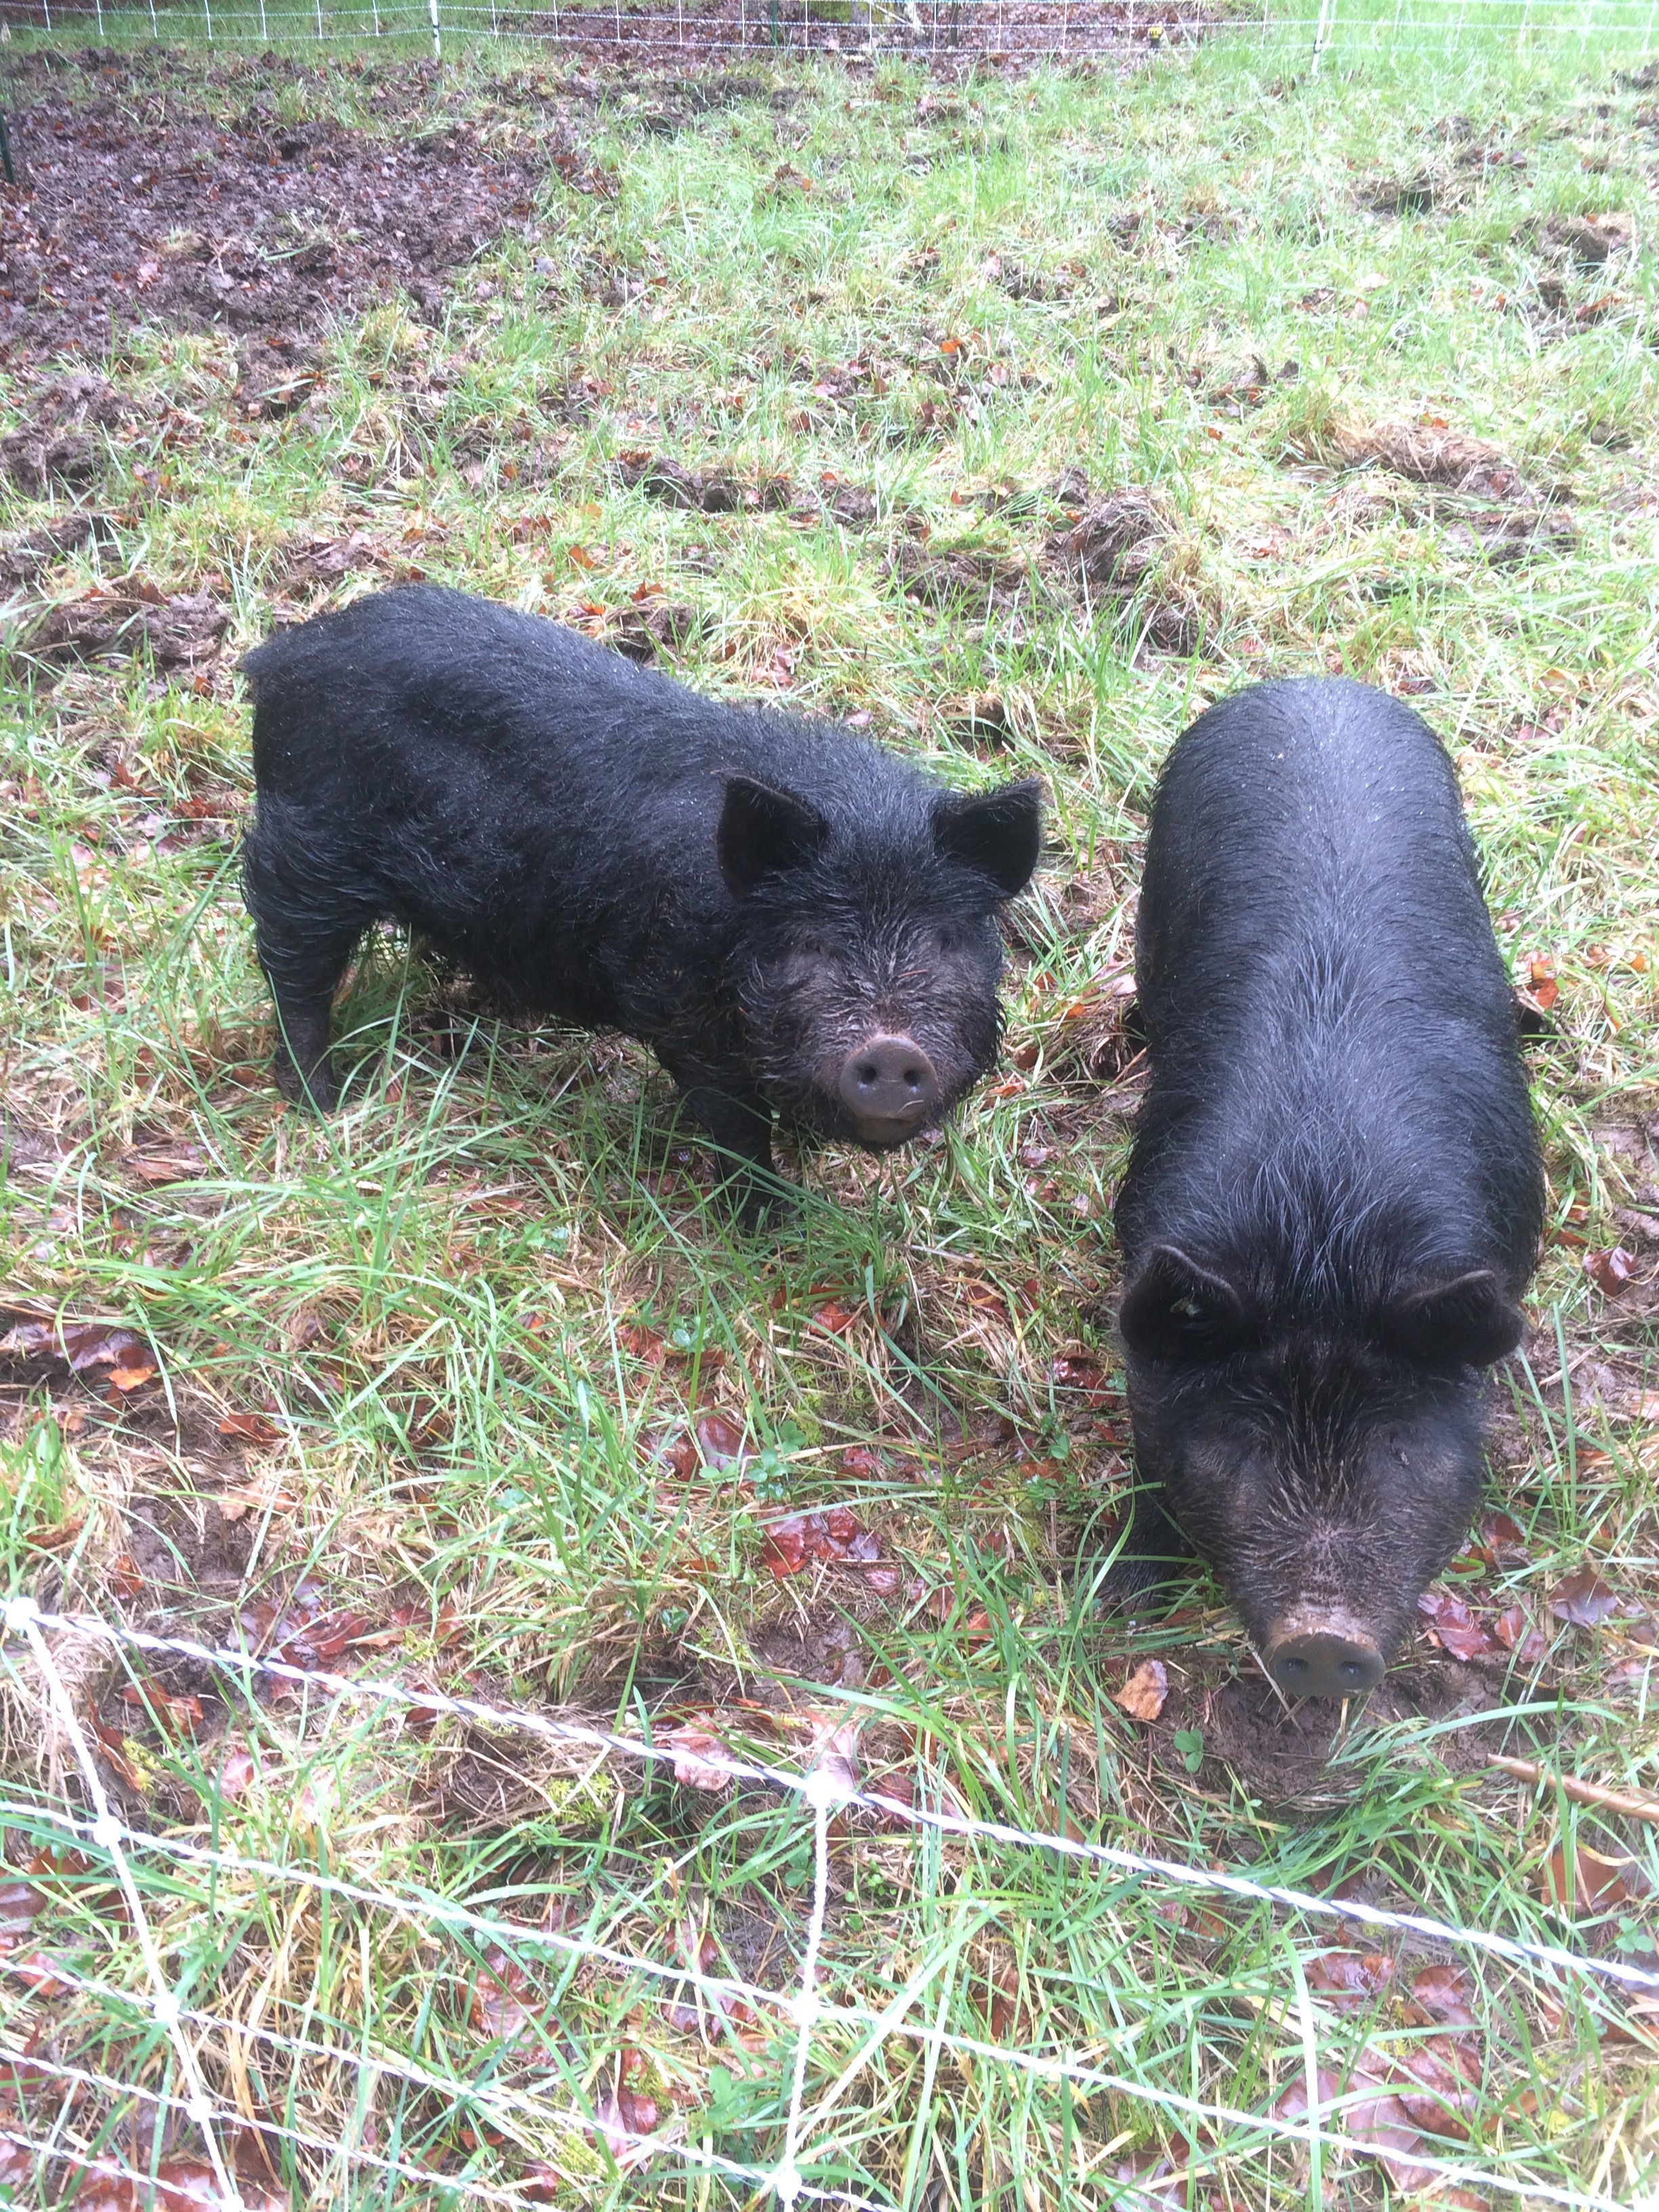 We got a mobile electric fence. The pigs are enjoying moving around once a week. The female one is on the right.